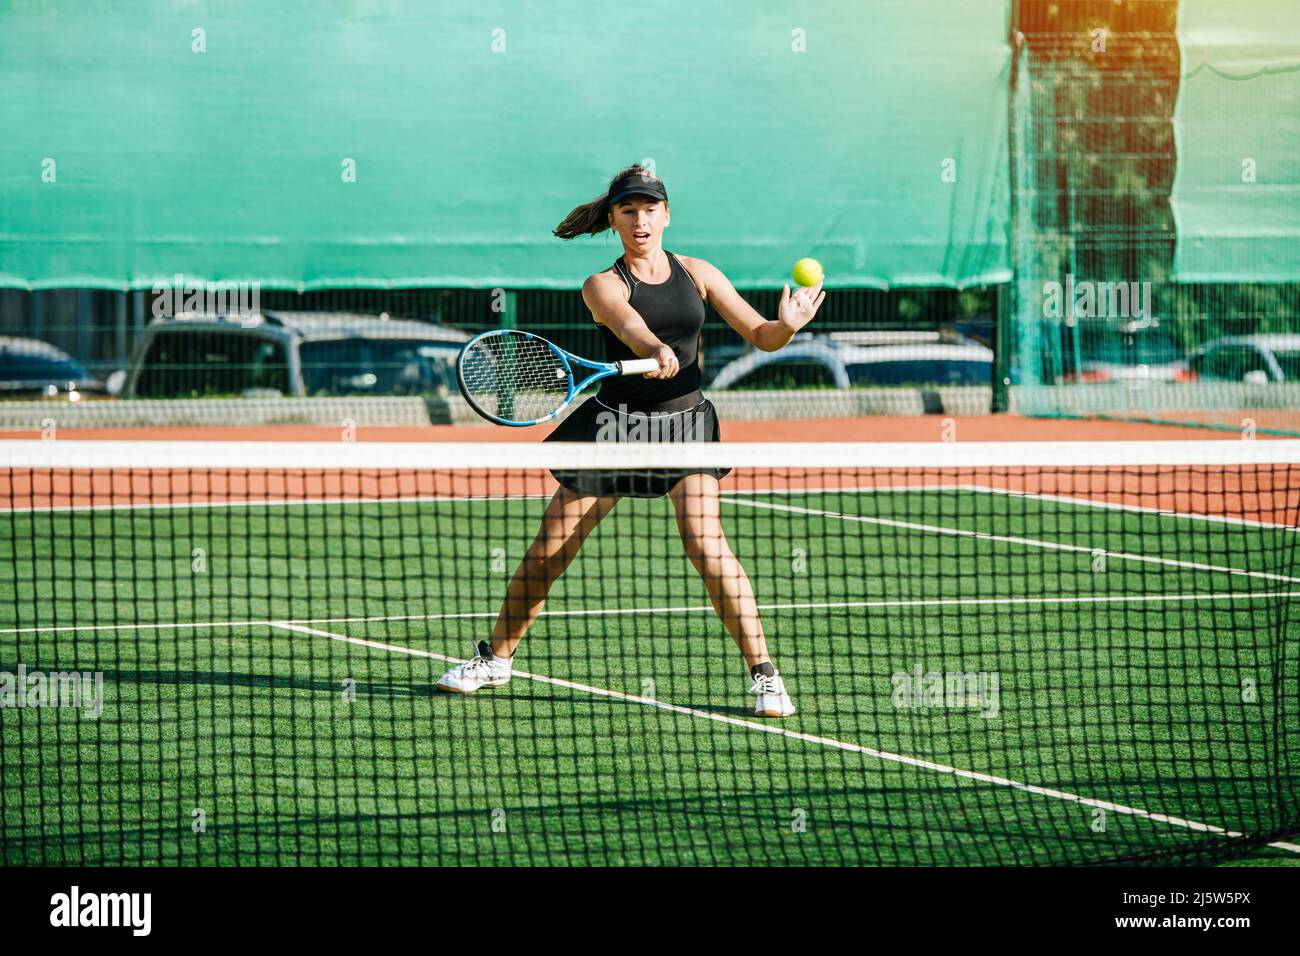 Teenage girl recieving a tennis ball with a volley counter shot. Practicing on a brand new outdoor tennis court. Vibrant green and brown with clear wh Stock Photo